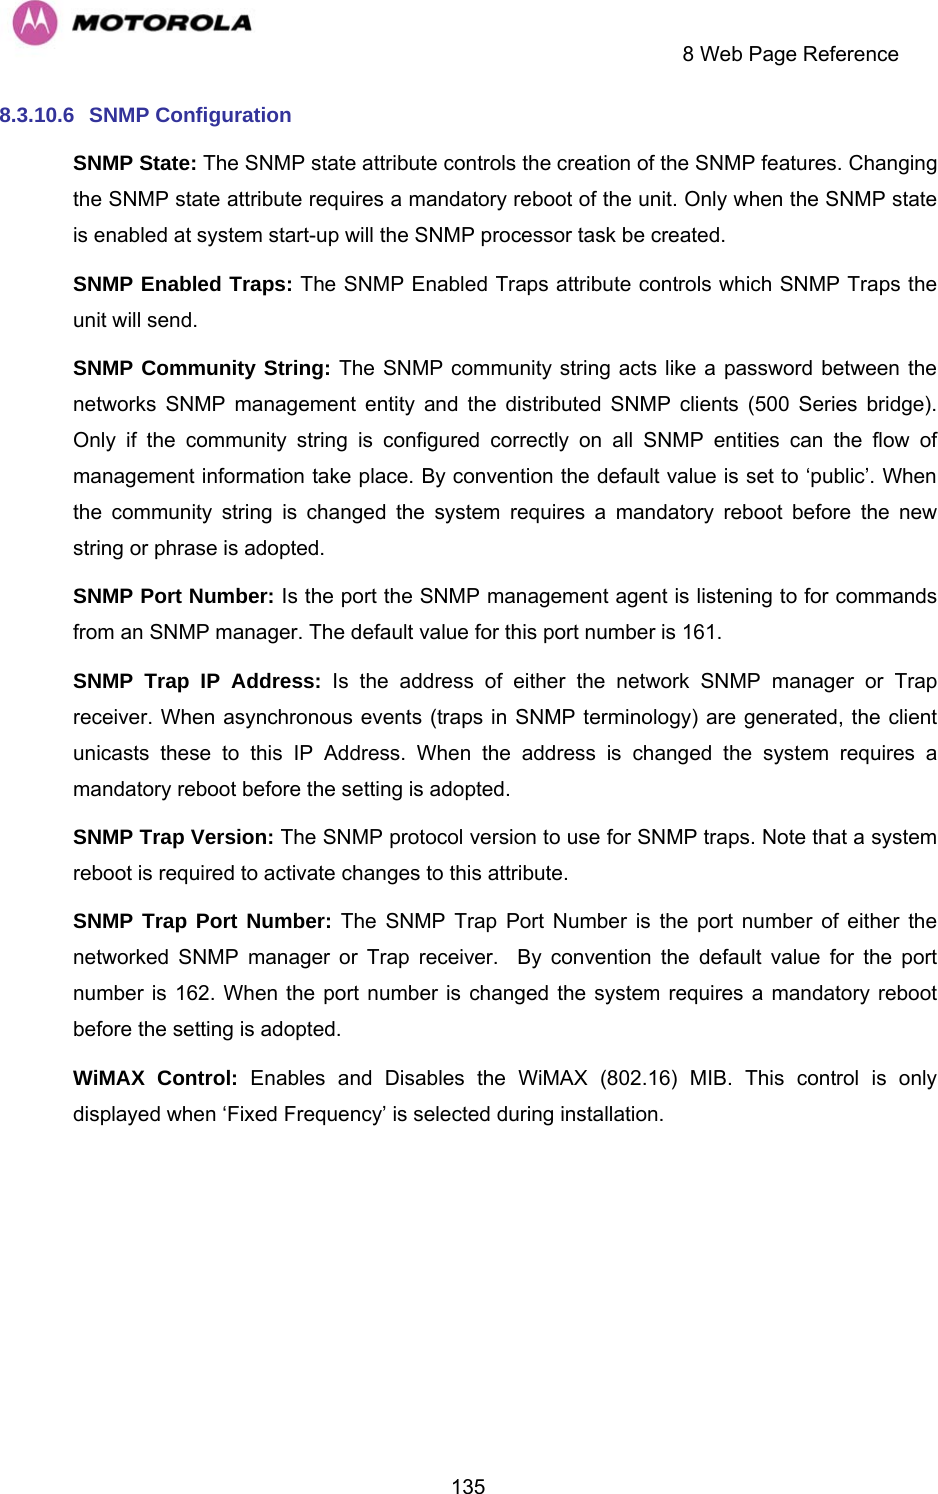     8 Web Page Reference  1358.3.10.6  SNMP Configuration SNMP State: The SNMP state attribute controls the creation of the SNMP features. Changing the SNMP state attribute requires a mandatory reboot of the unit. Only when the SNMP state is enabled at system start-up will the SNMP processor task be created. SNMP Enabled Traps: The SNMP Enabled Traps attribute controls which SNMP Traps the unit will send. SNMP Community String: The SNMP community string acts like a password between the networks SNMP management entity and the distributed SNMP clients (500 Series bridge). Only if the community string is configured correctly on all SNMP entities can the flow of management information take place. By convention the default value is set to ‘public’. When the community string is changed the system requires a mandatory reboot before the new string or phrase is adopted. SNMP Port Number: Is the port the SNMP management agent is listening to for commands from an SNMP manager. The default value for this port number is 161. SNMP Trap IP Address: Is the address of either the network SNMP manager or Trap receiver. When asynchronous events (traps in SNMP terminology) are generated, the client unicasts these to this IP Address. When the address is changed the system requires a mandatory reboot before the setting is adopted. SNMP Trap Version: The SNMP protocol version to use for SNMP traps. Note that a system reboot is required to activate changes to this attribute. SNMP Trap Port Number: The SNMP Trap Port Number is the port number of either the networked SNMP manager or Trap receiver.  By convention the default value for the port number is 162. When the port number is changed the system requires a mandatory reboot before the setting is adopted. WiMAX Control: Enables and Disables the WiMAX (802.16) MIB. This control is only displayed when ‘Fixed Frequency’ is selected during installation. 